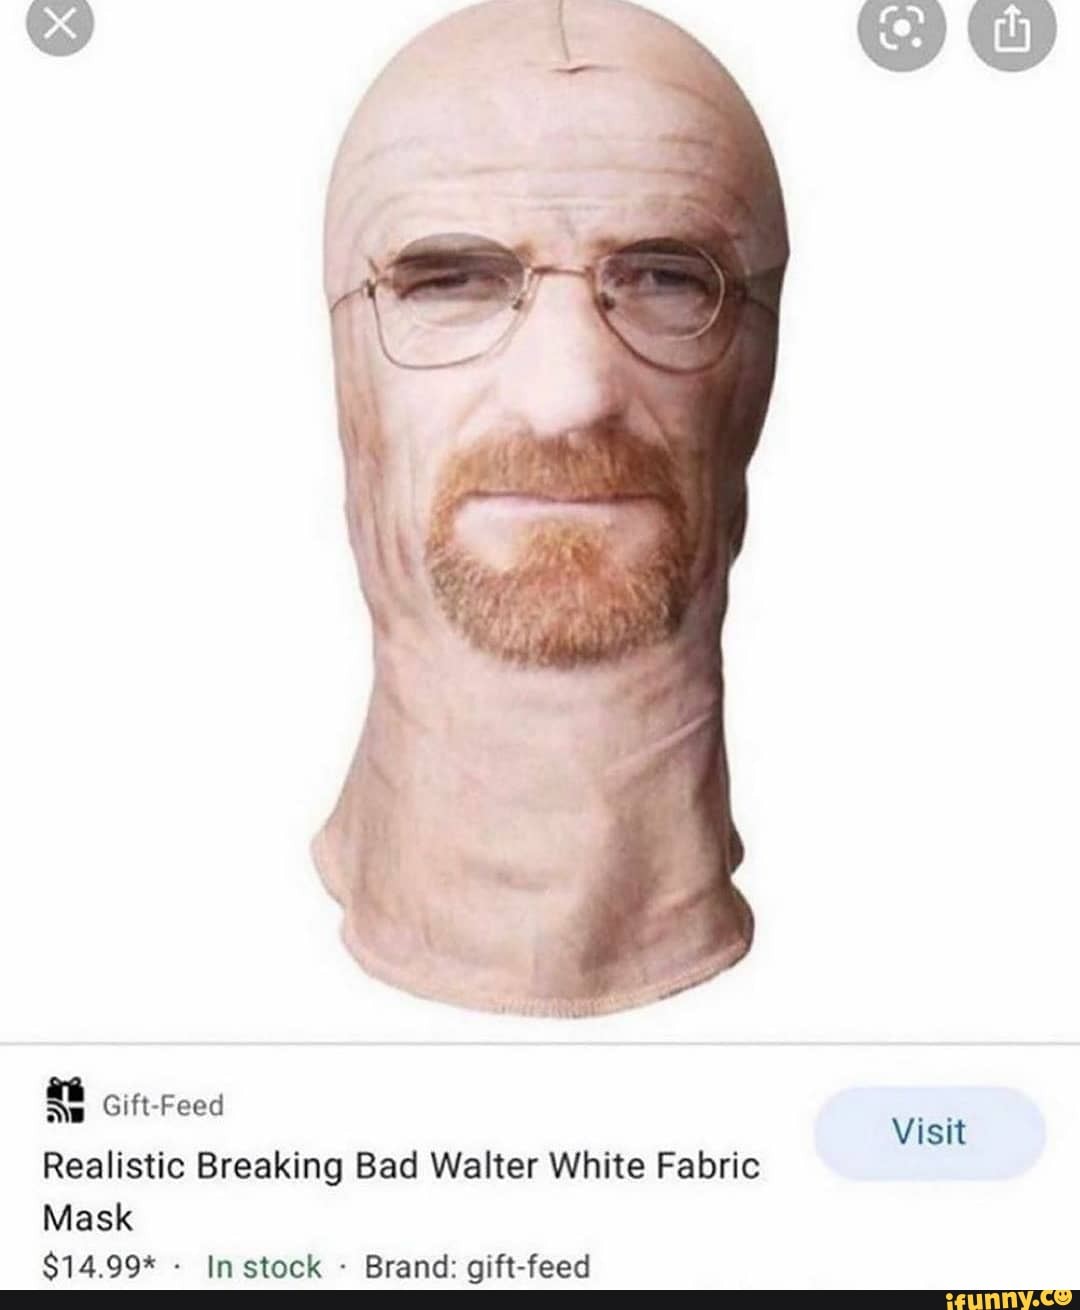 8 T Feed Visit Realistic Breaking Bad Walter White Fabric Mask Oor In Ectarl Rrand Nift